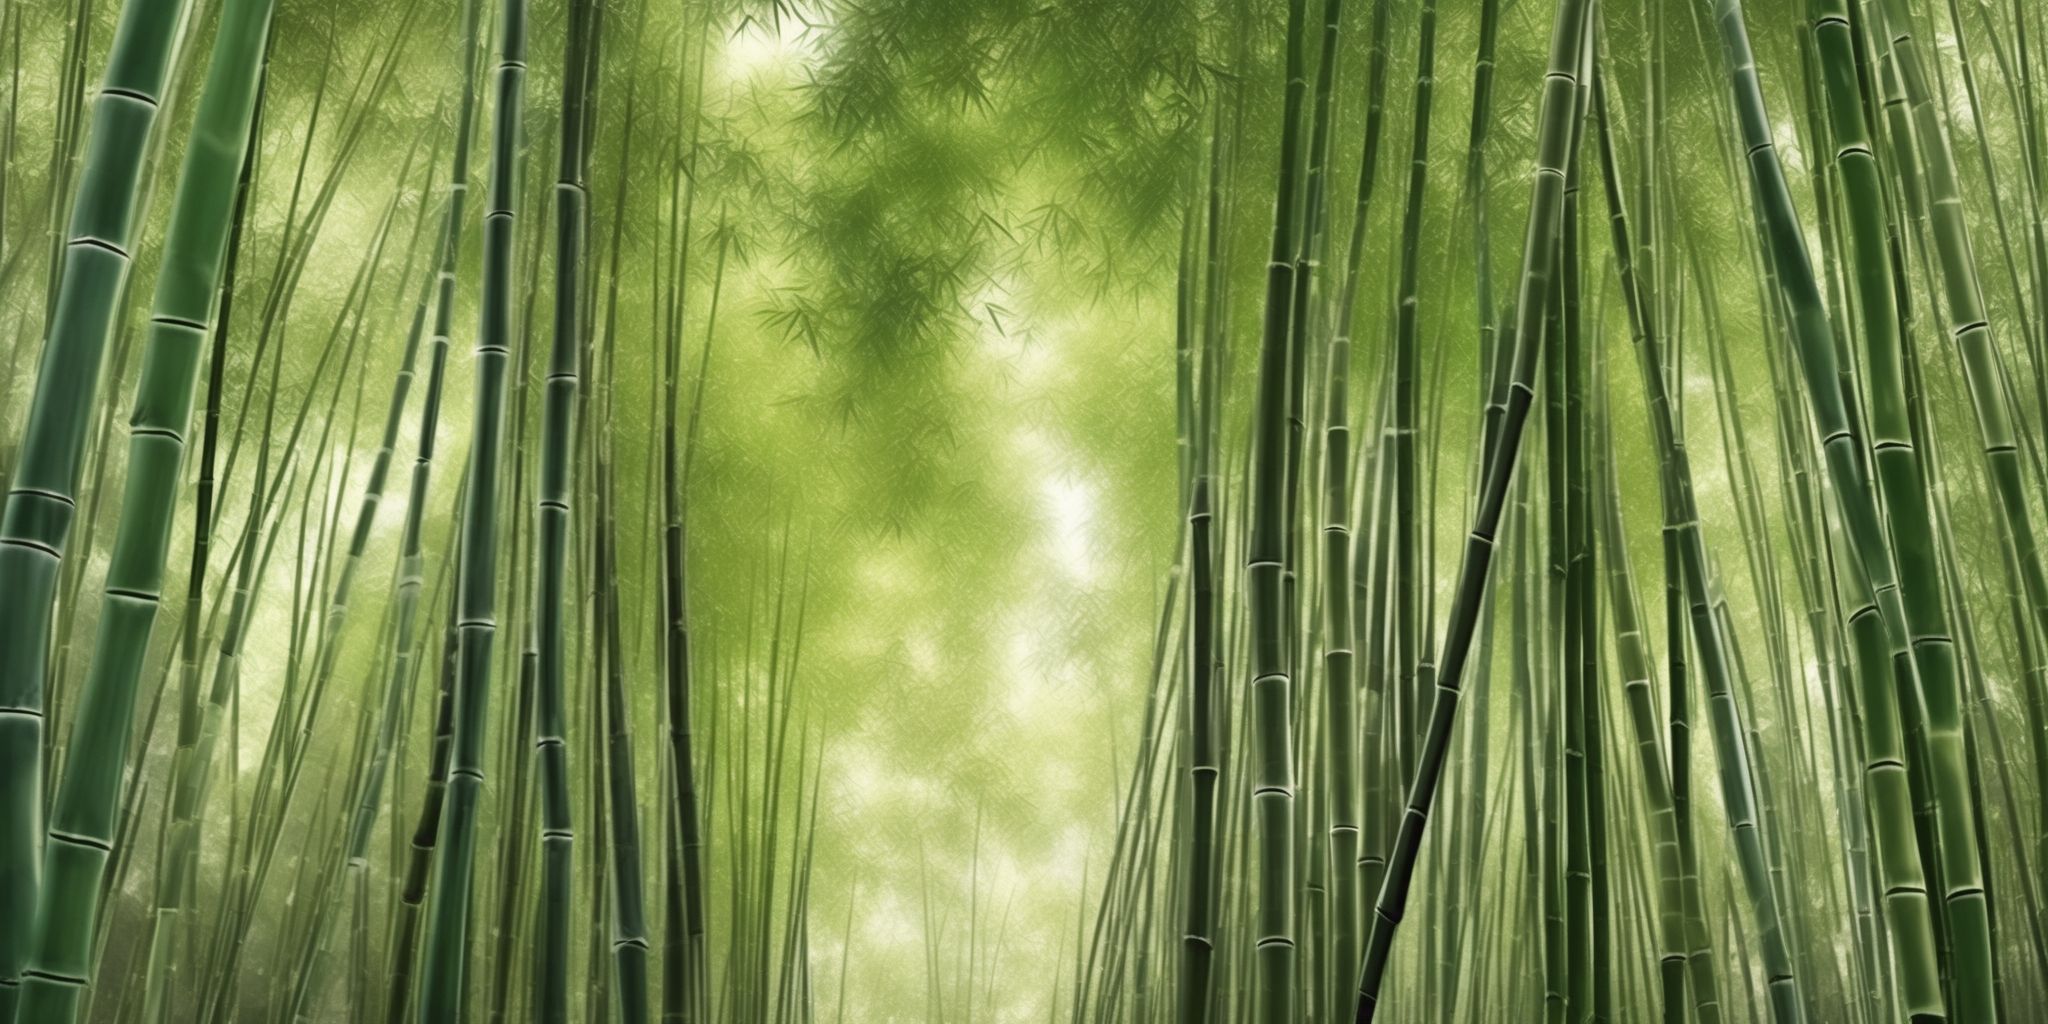 Bamboo forest  in realistic, photographic style